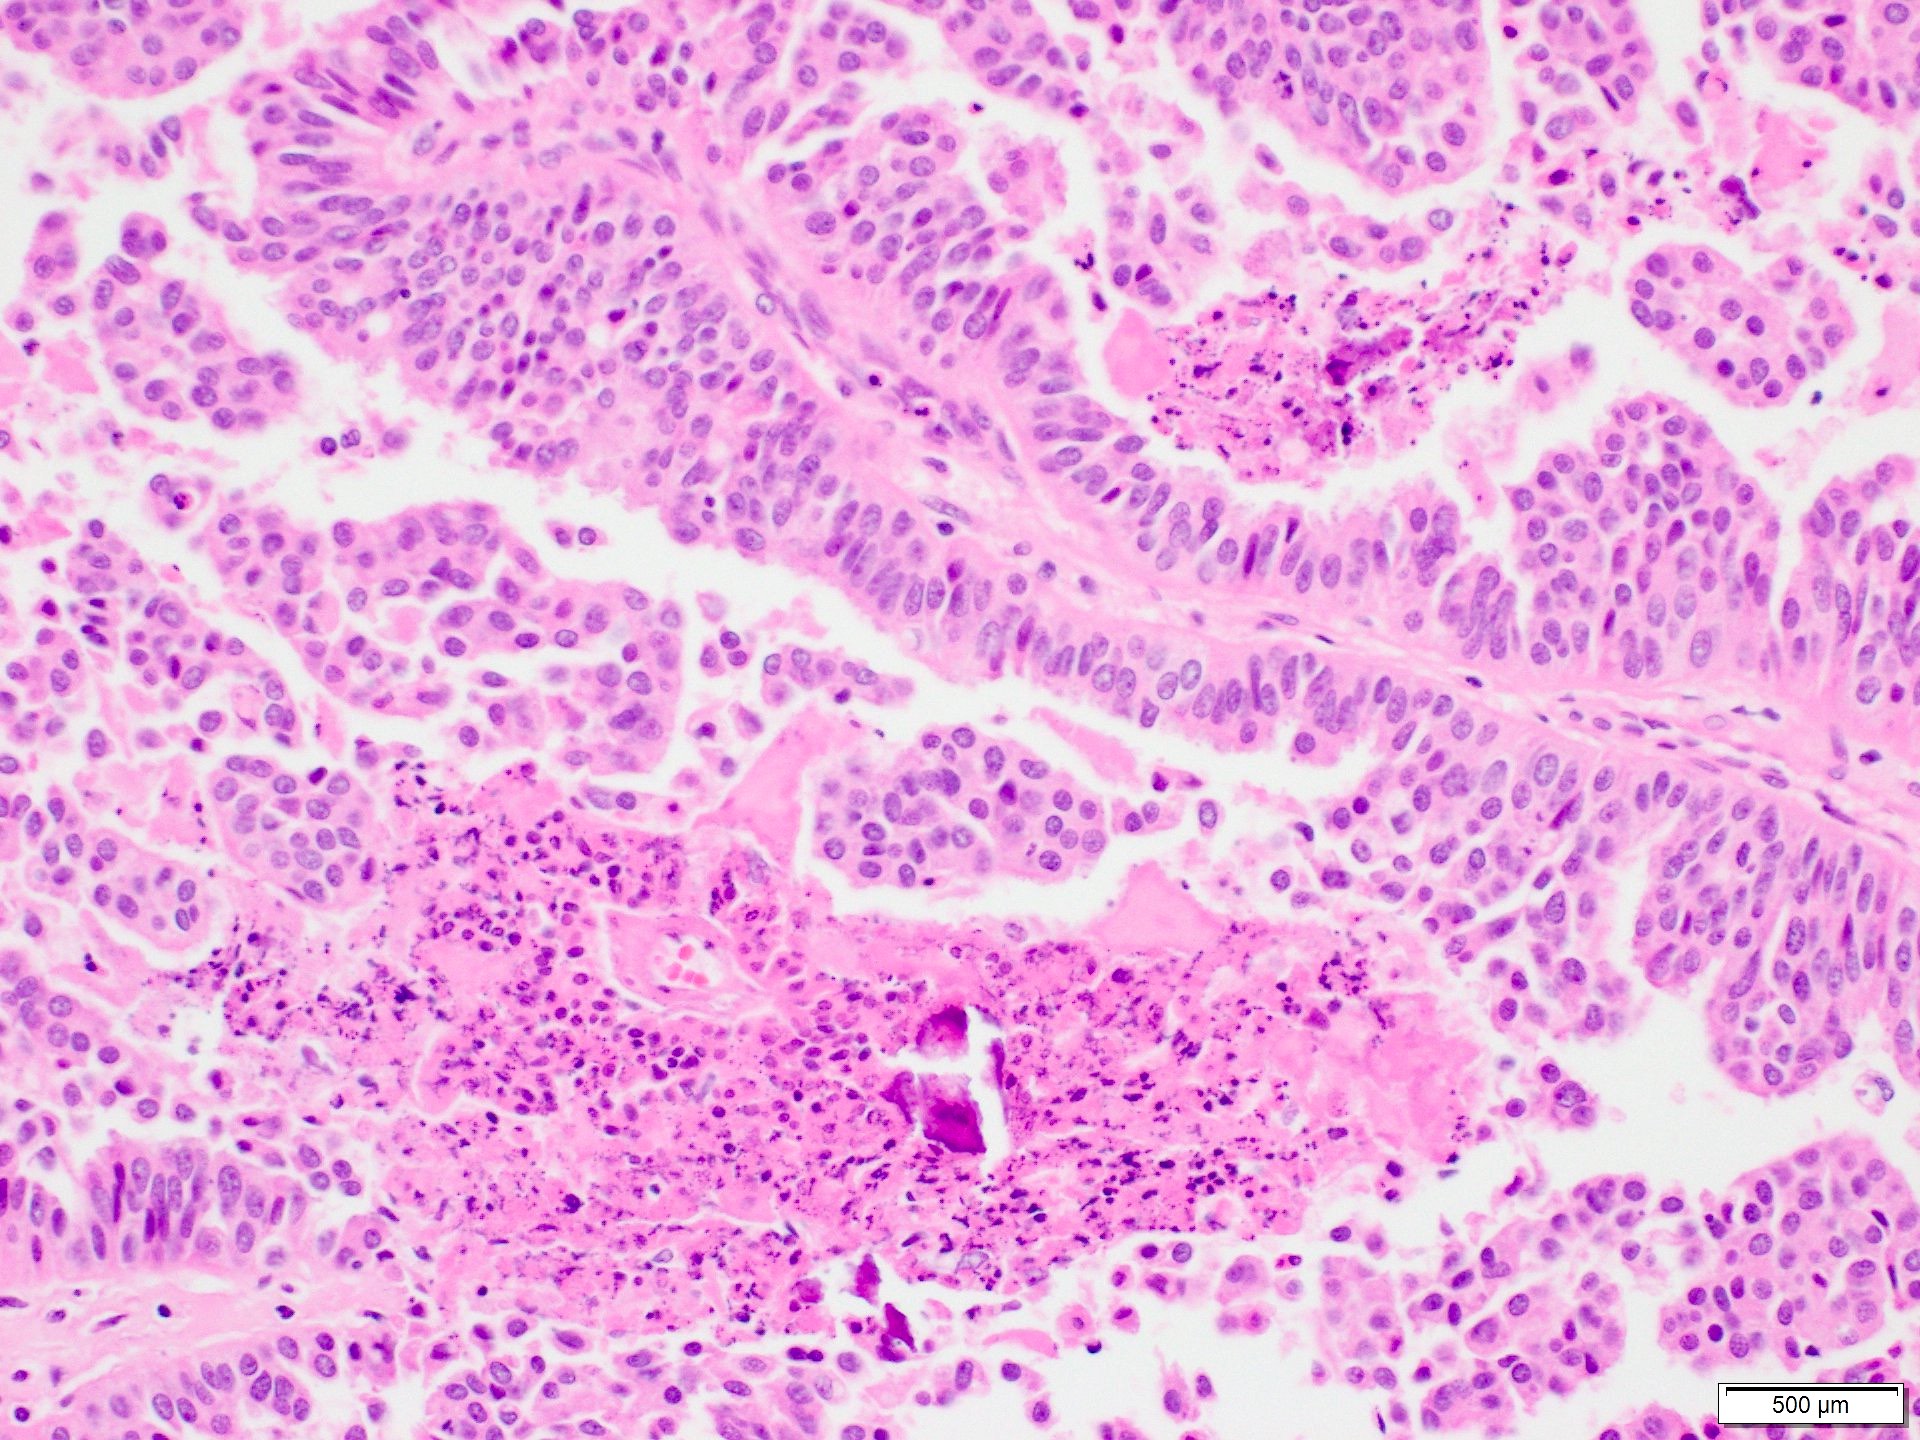 intraductal papilloma with dcis pathology outlines)